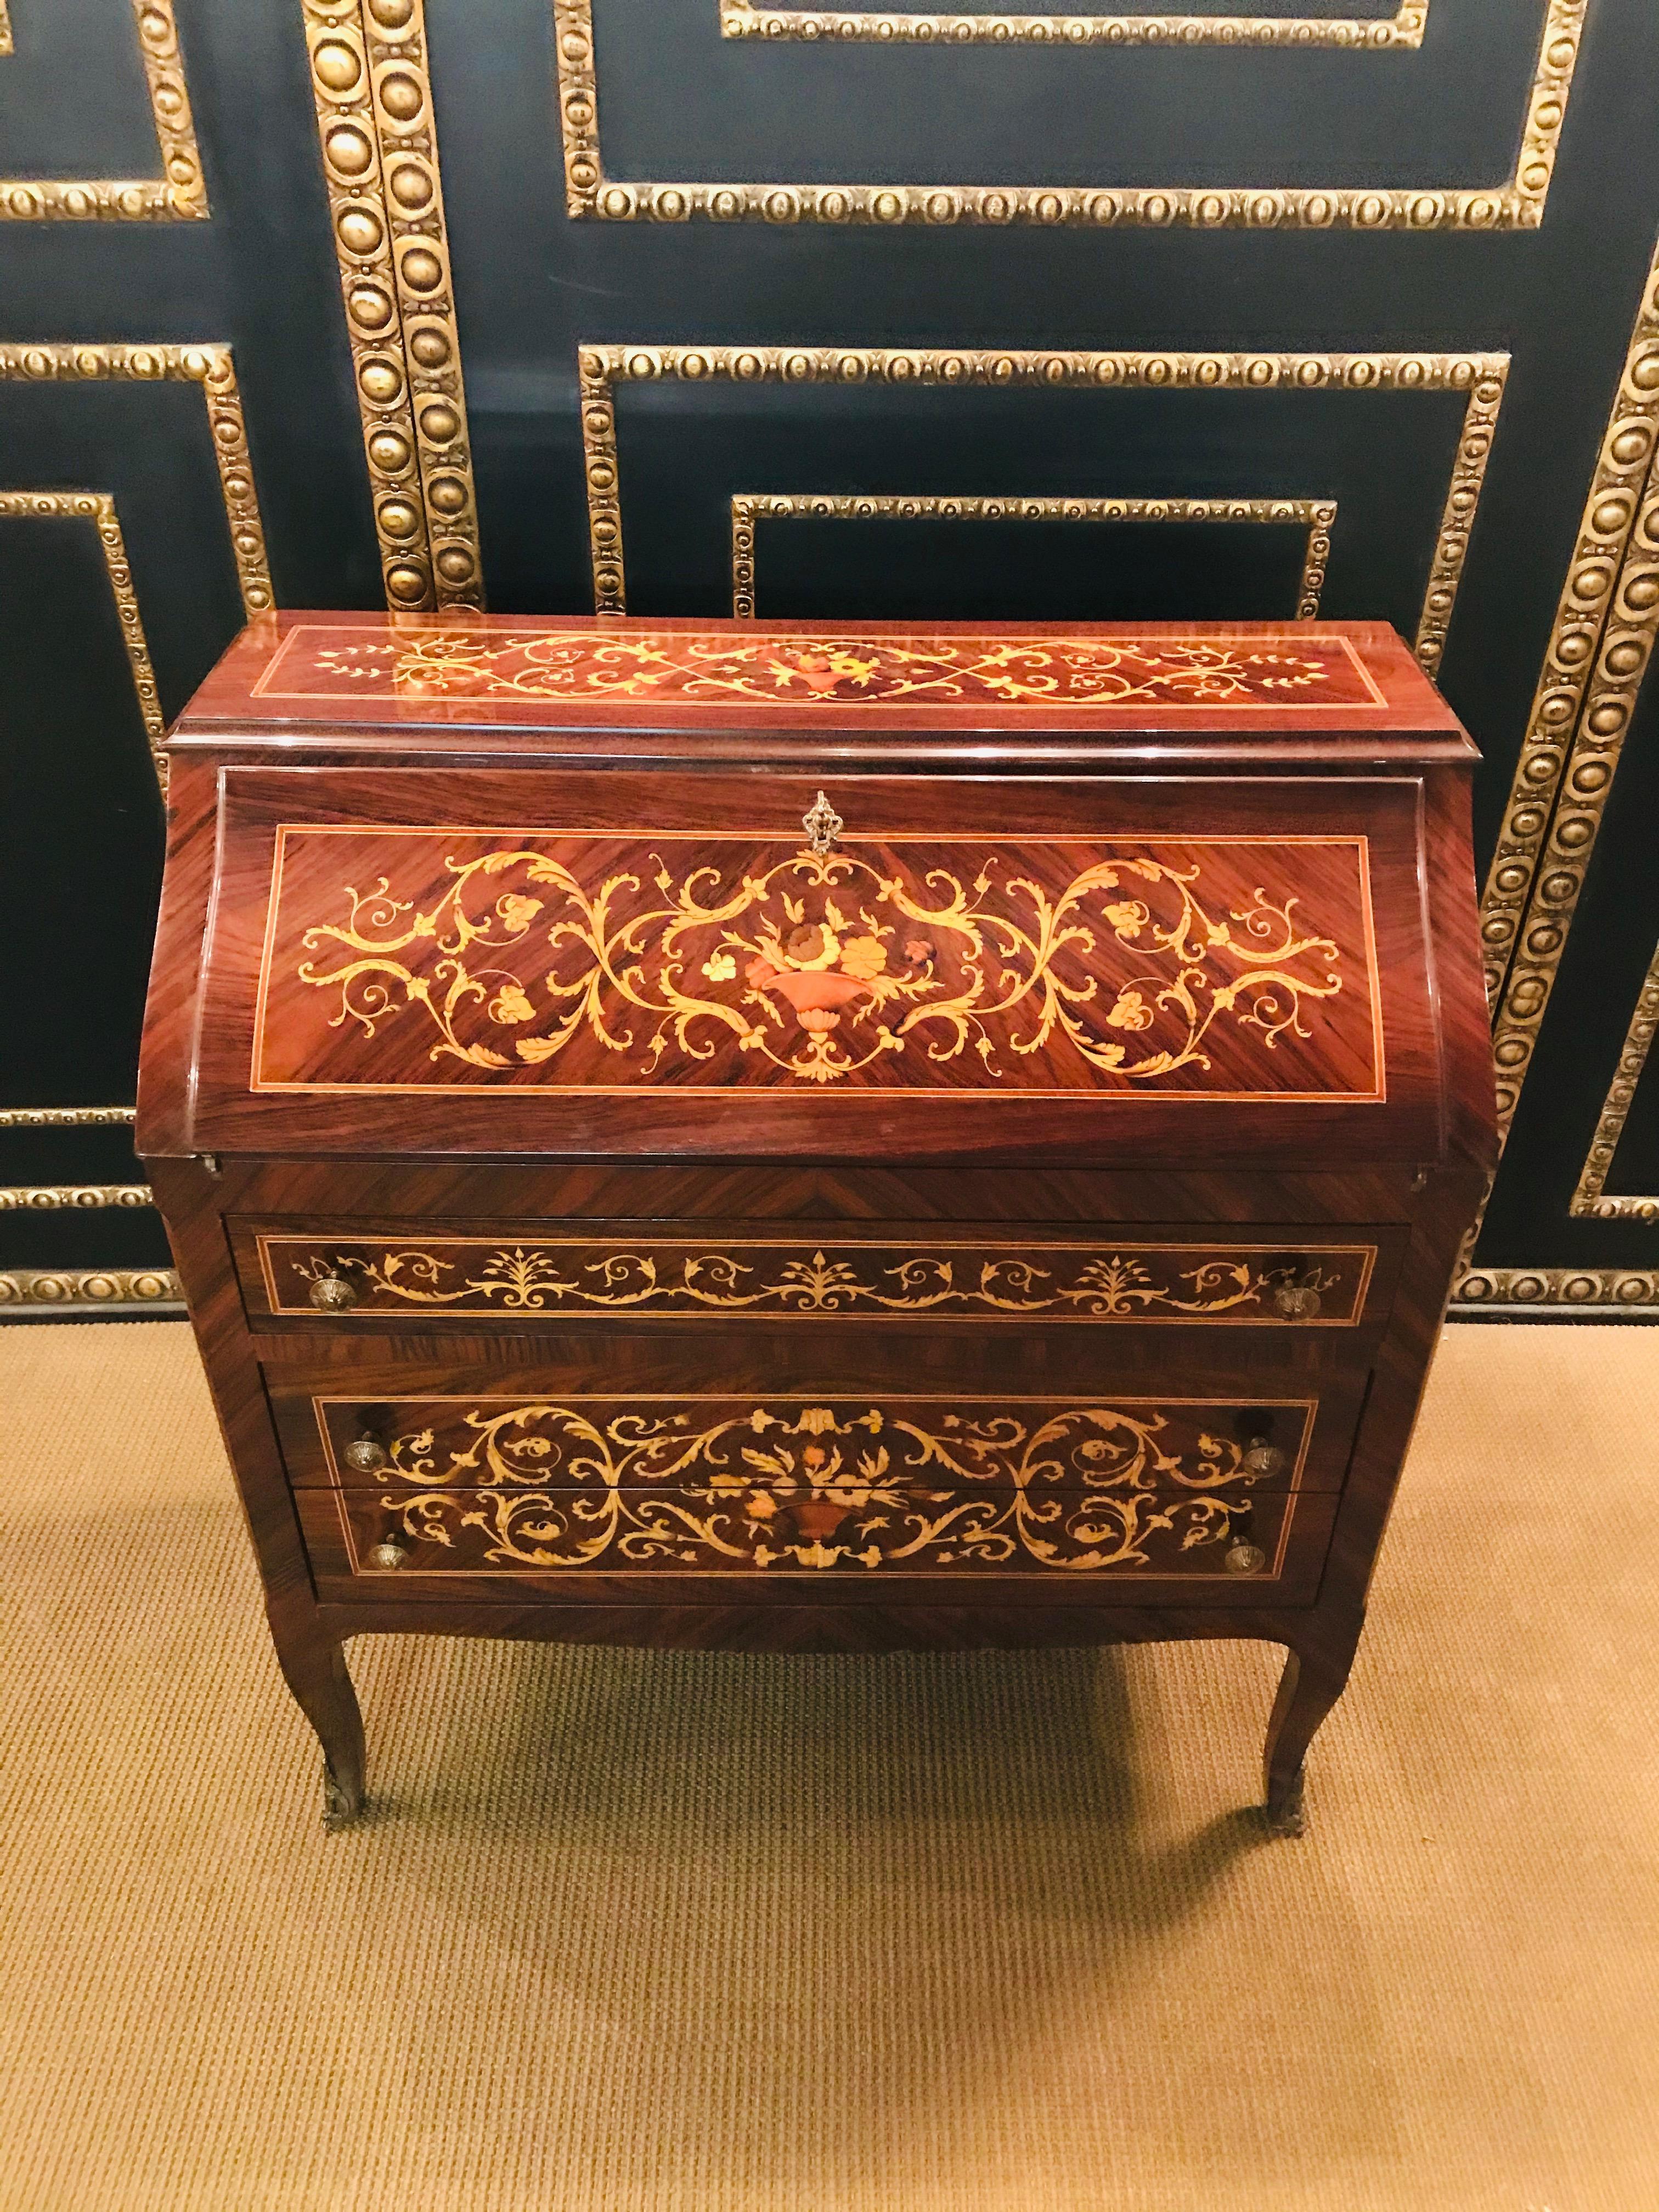 A very beautiful, elegant ladies secretary in the Italian style, the 20th century. Rosewood veneer and various precious woods, floral inlay, high-gloss lacquered body with three drawers on slightly curved legs, inside with various compartments